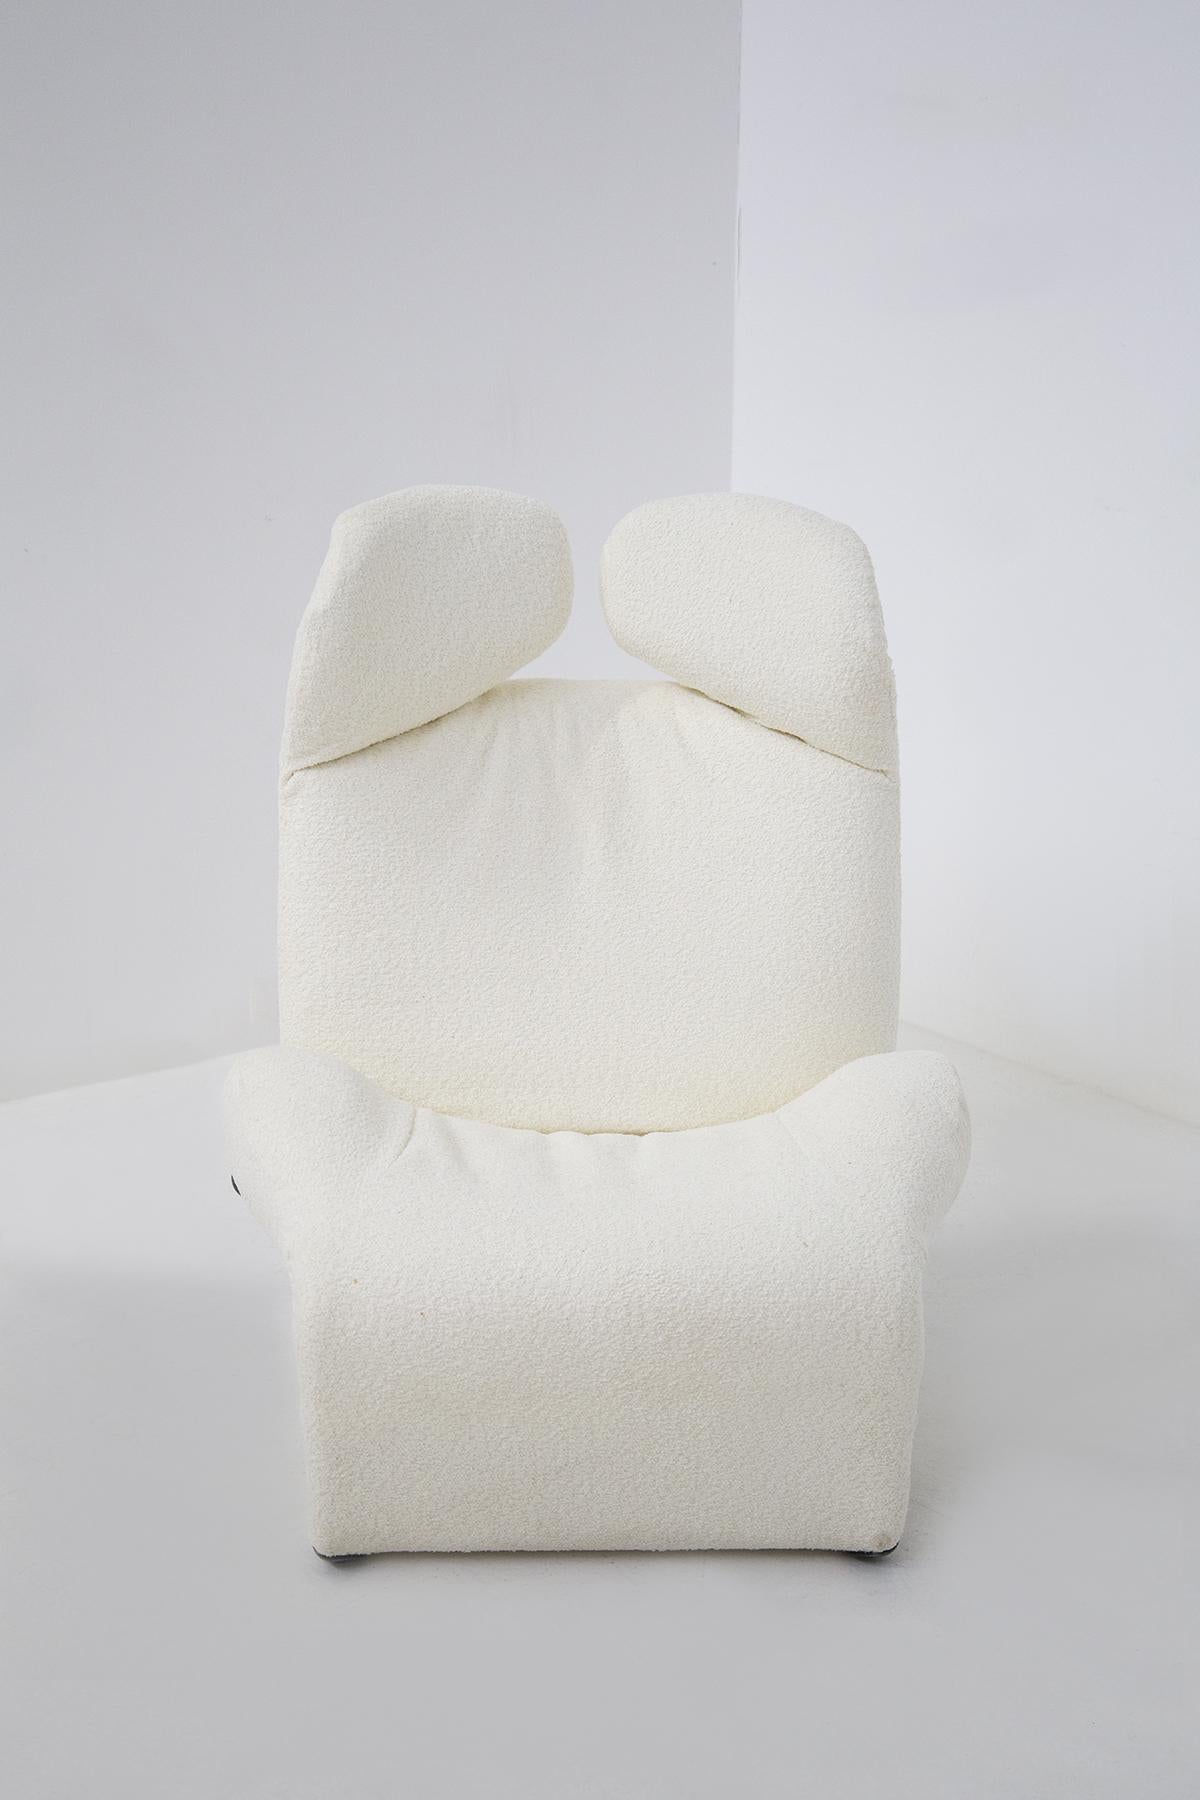 Late 20th Century White 111 Wink Chaise Longue by Toshiyuki Kita for Cassina For Sale